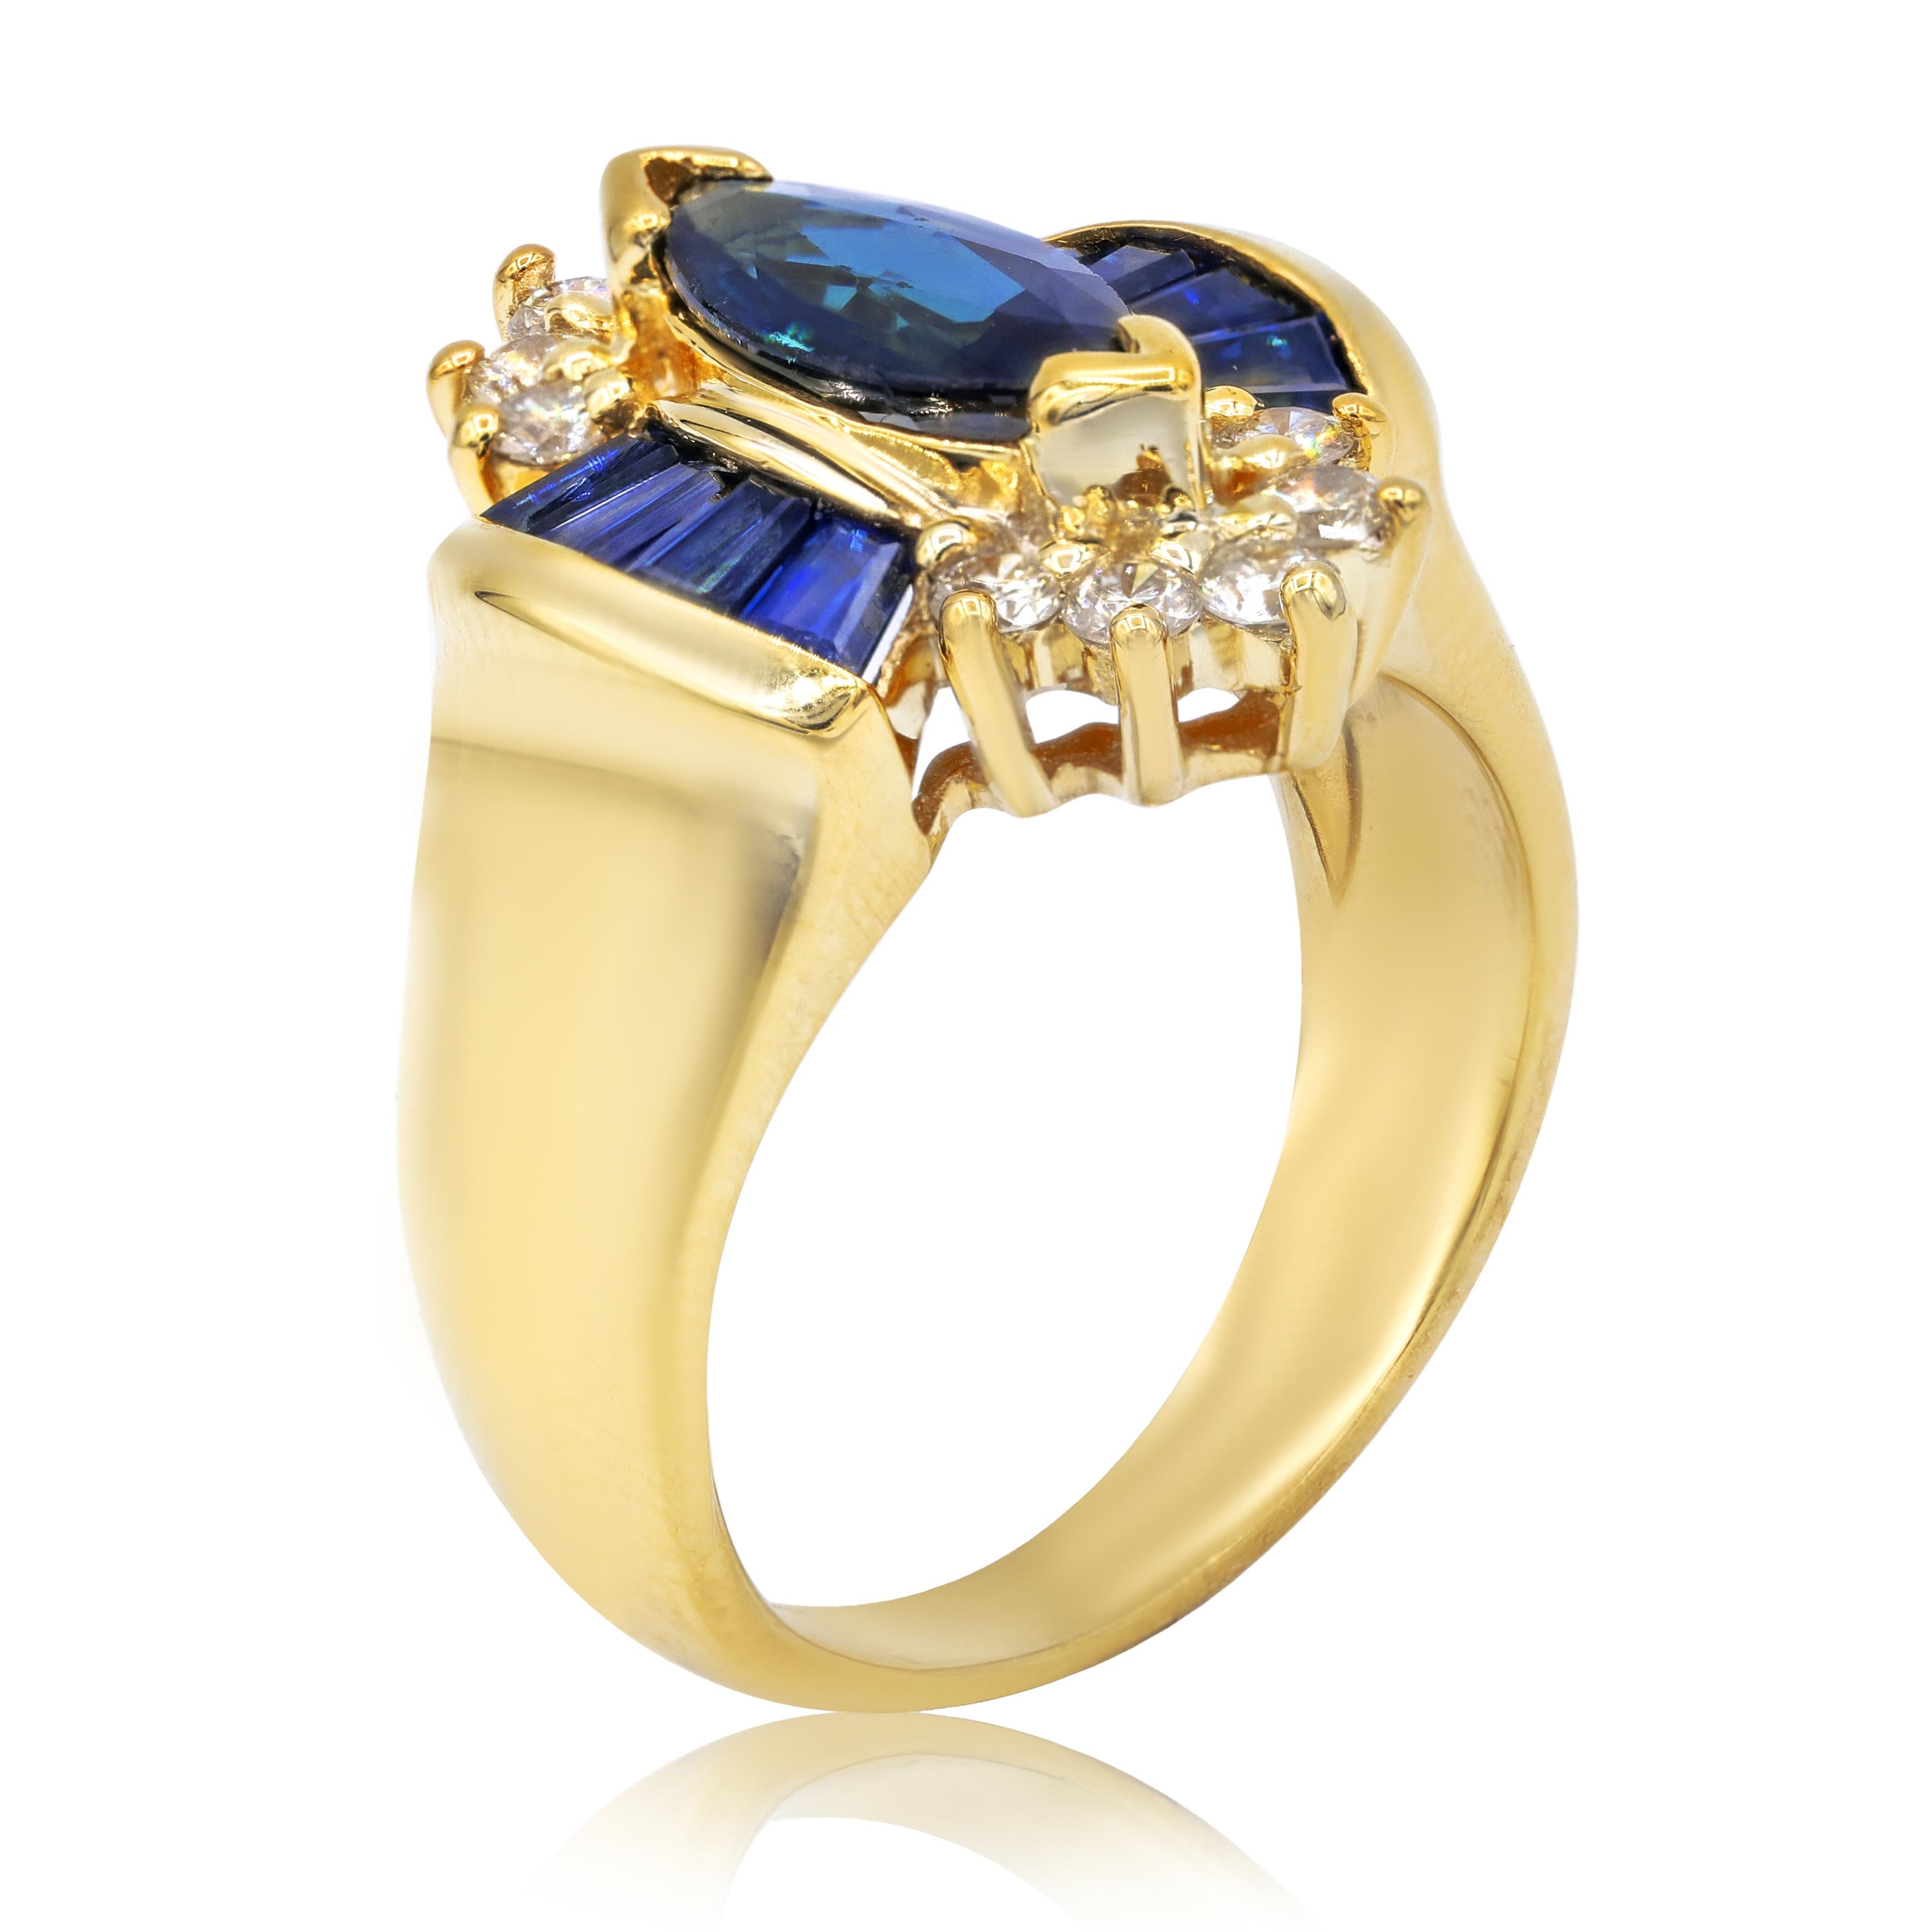 14KT yellow gold fashion ring with 2.00ct blue sapphire as a main stone and baguettes on the side and  round diamonds on the edges weighing 0.40cts of diamonds.
Size: 6
Can be resized to any finger size.

This product comes with a certificate
This